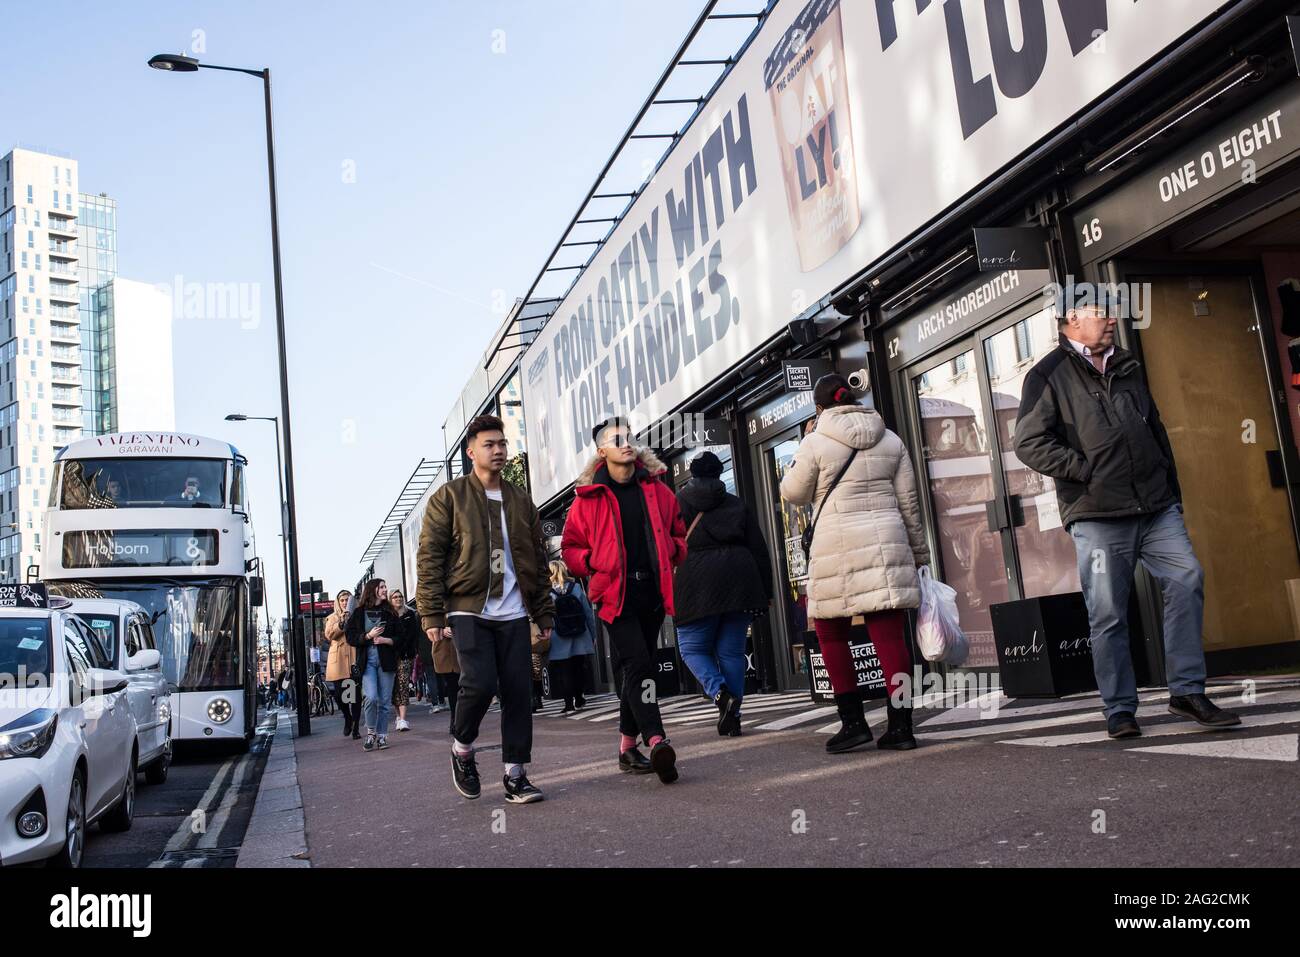 London, England - November 2019: People walking and shopping at the BOXPARK, a cool pop up shopping venue with several indie shops and bars in Shoredi Stock Photo